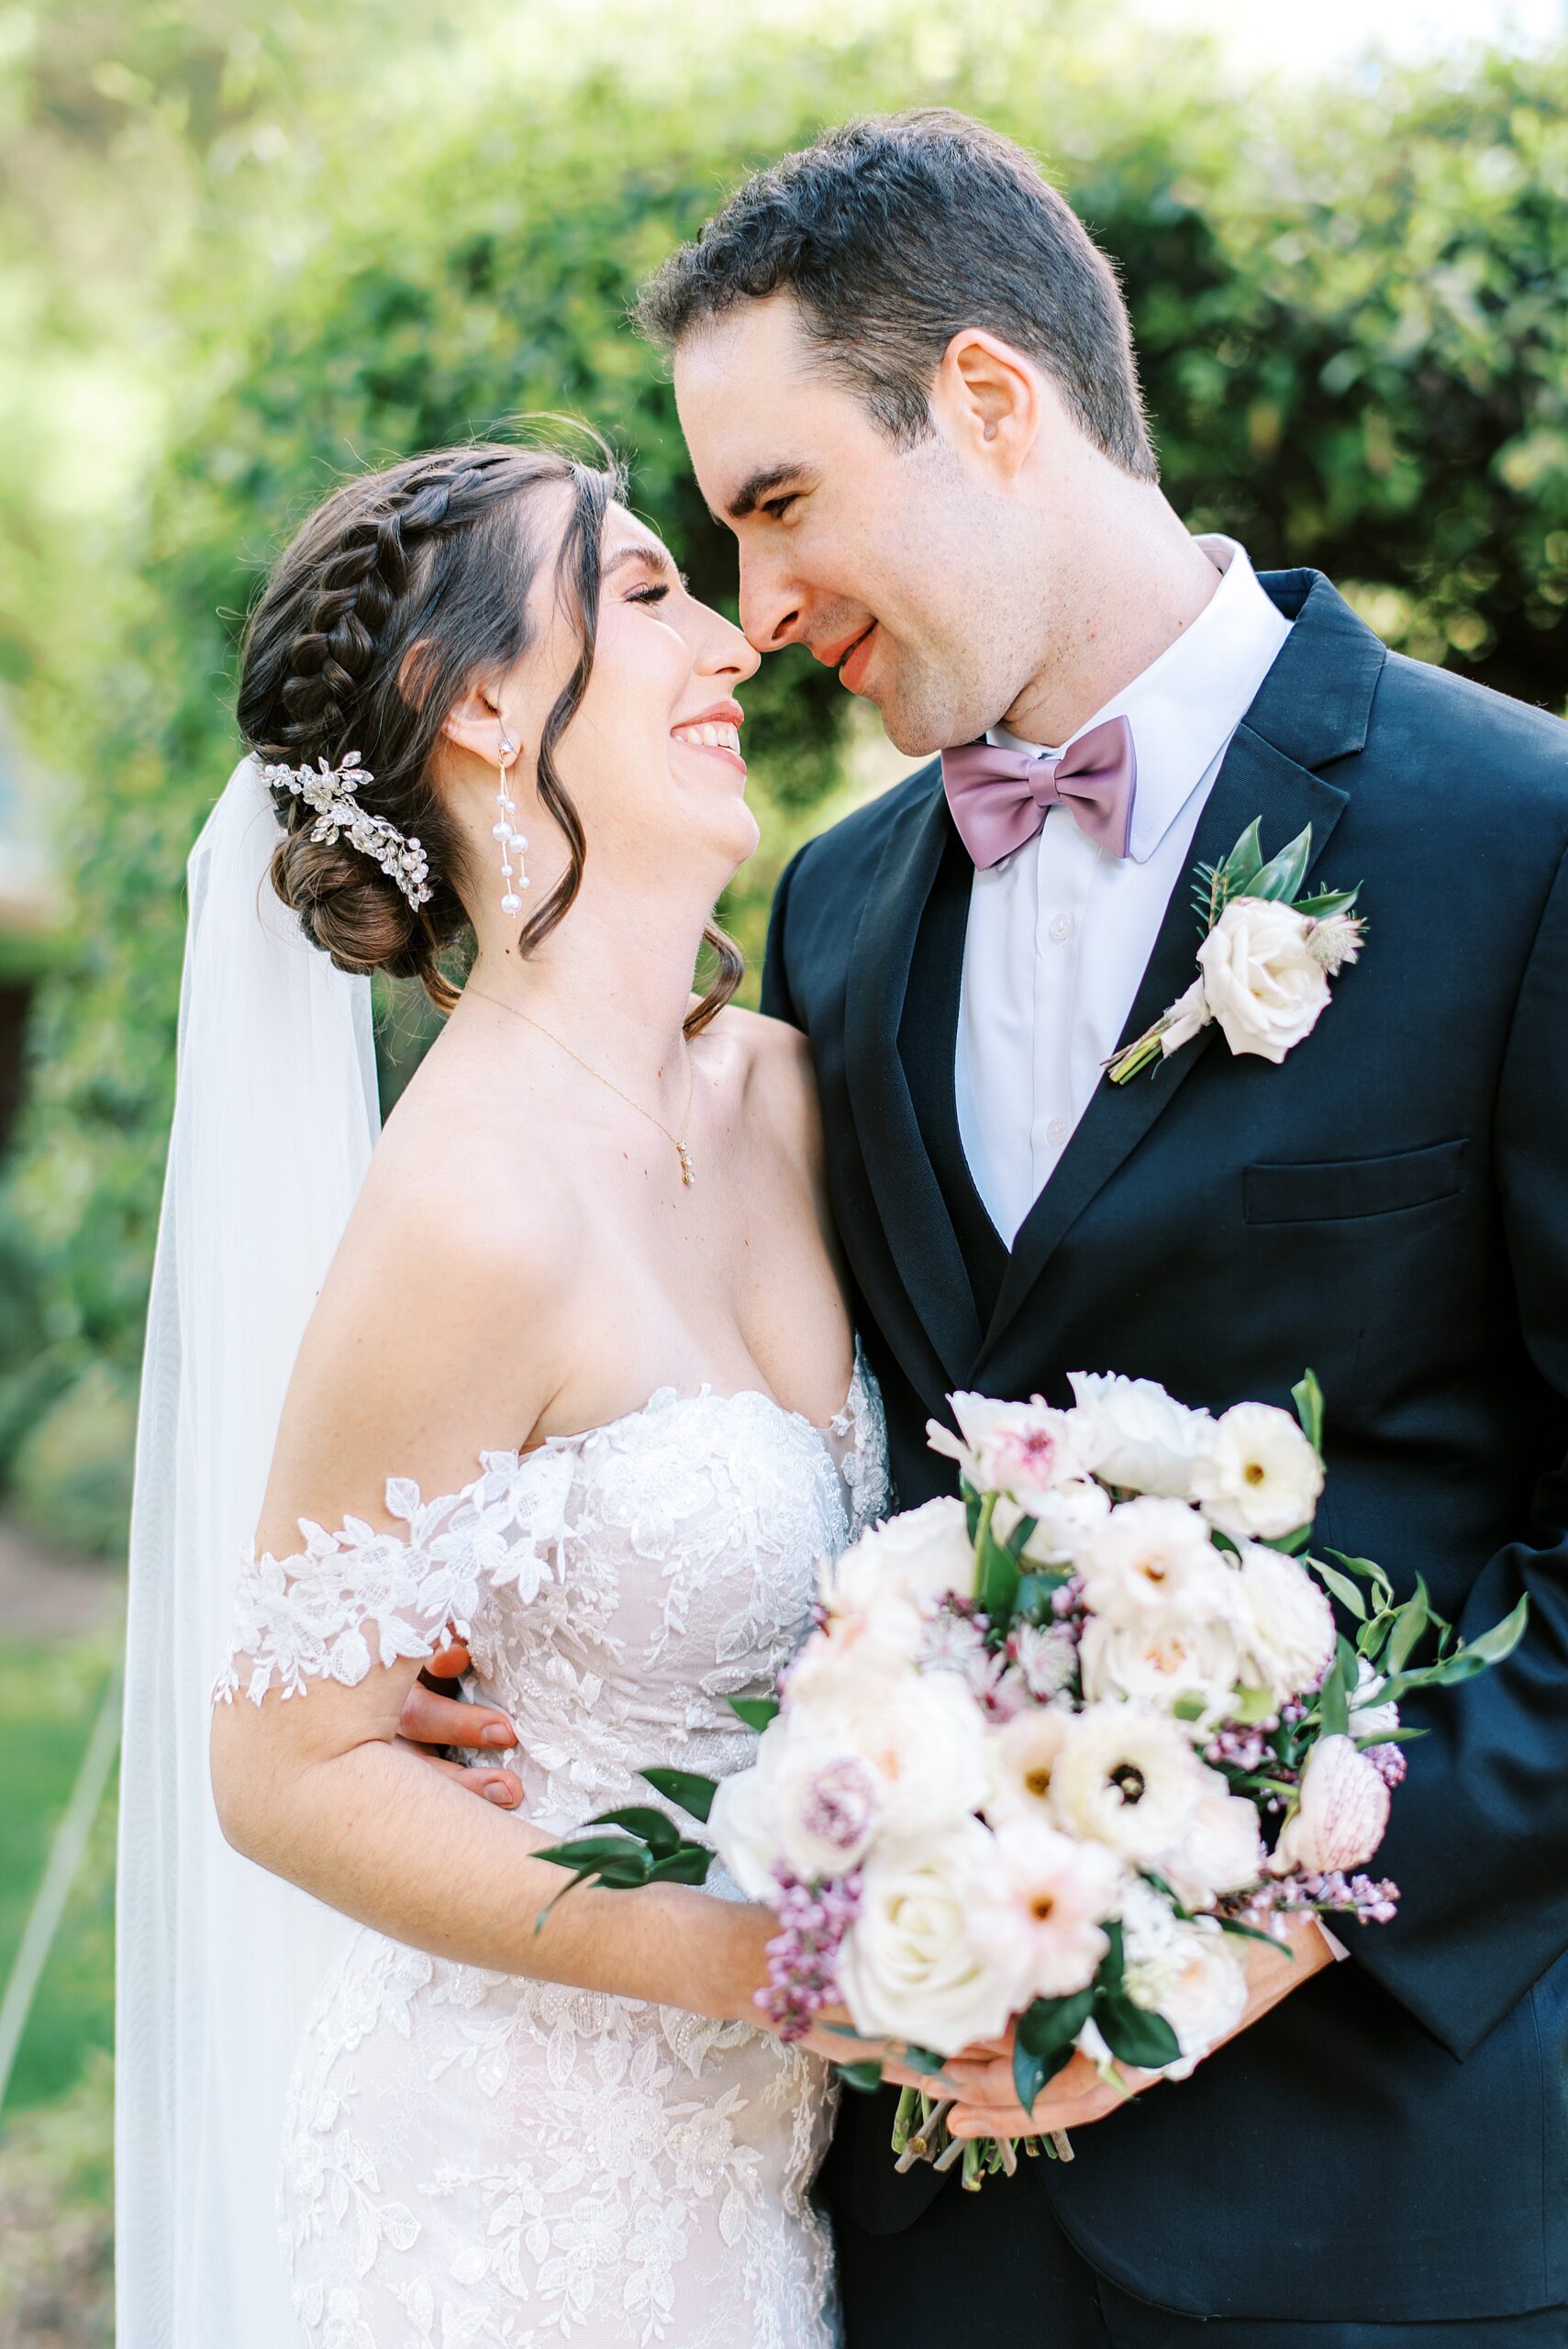 Newlyweds touch noses before a kiss while standing in a garden